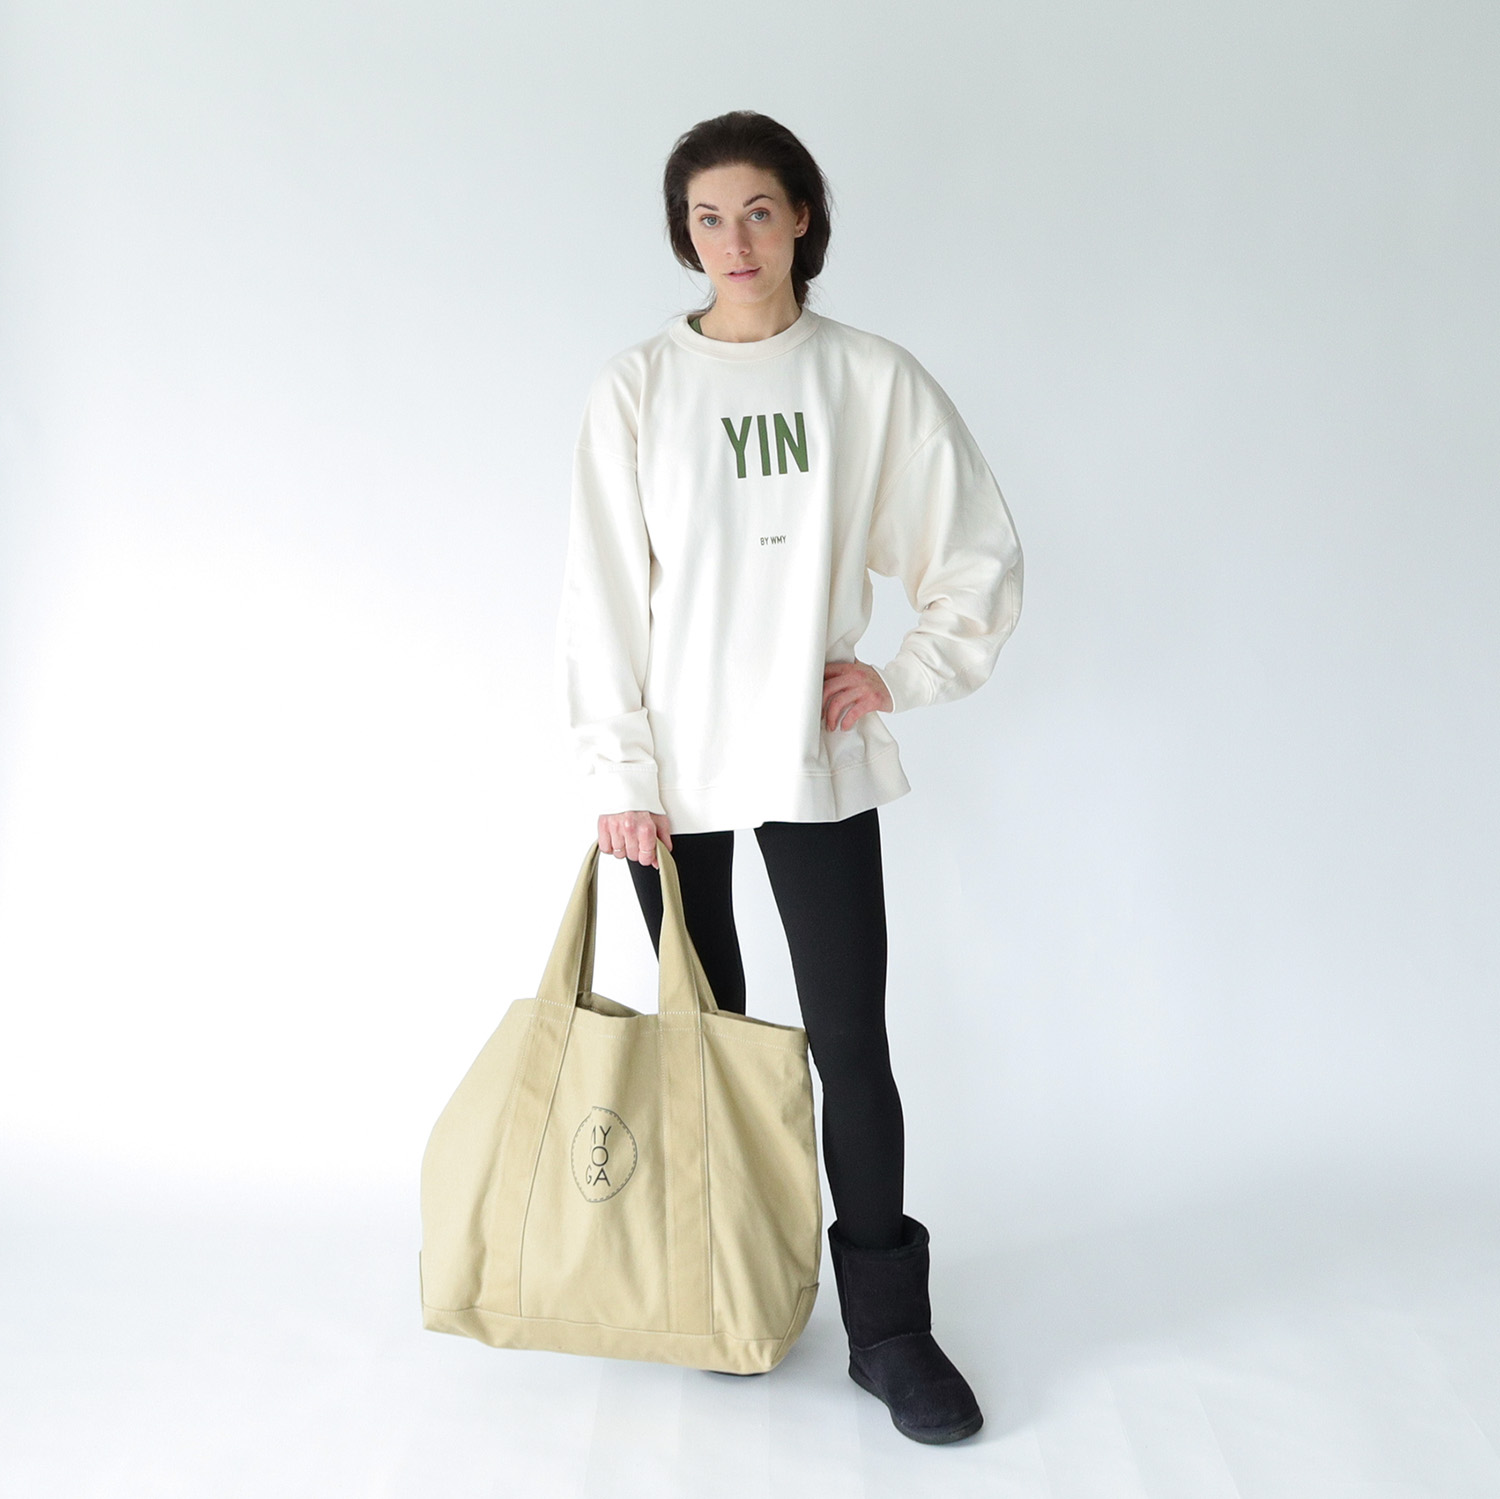 Over-Sized YIN Yoga Sweatshirt i Off White -print in green Color.